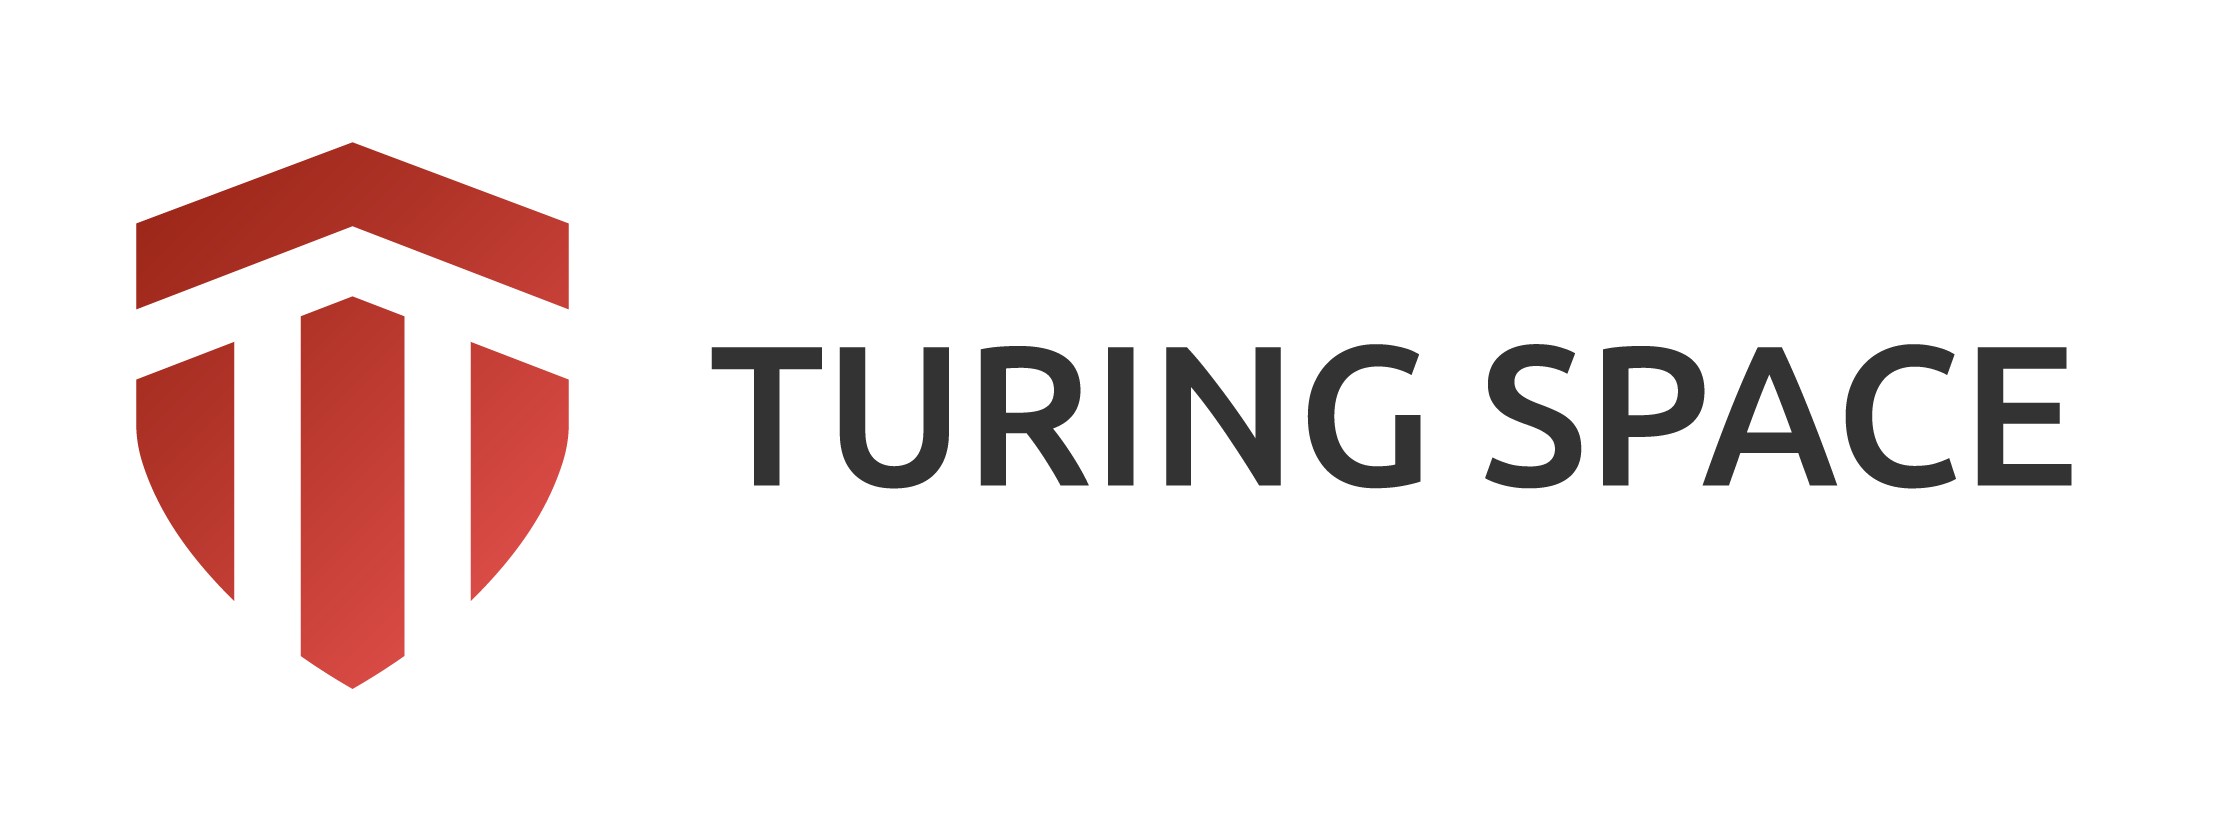 Turing Space Inc.